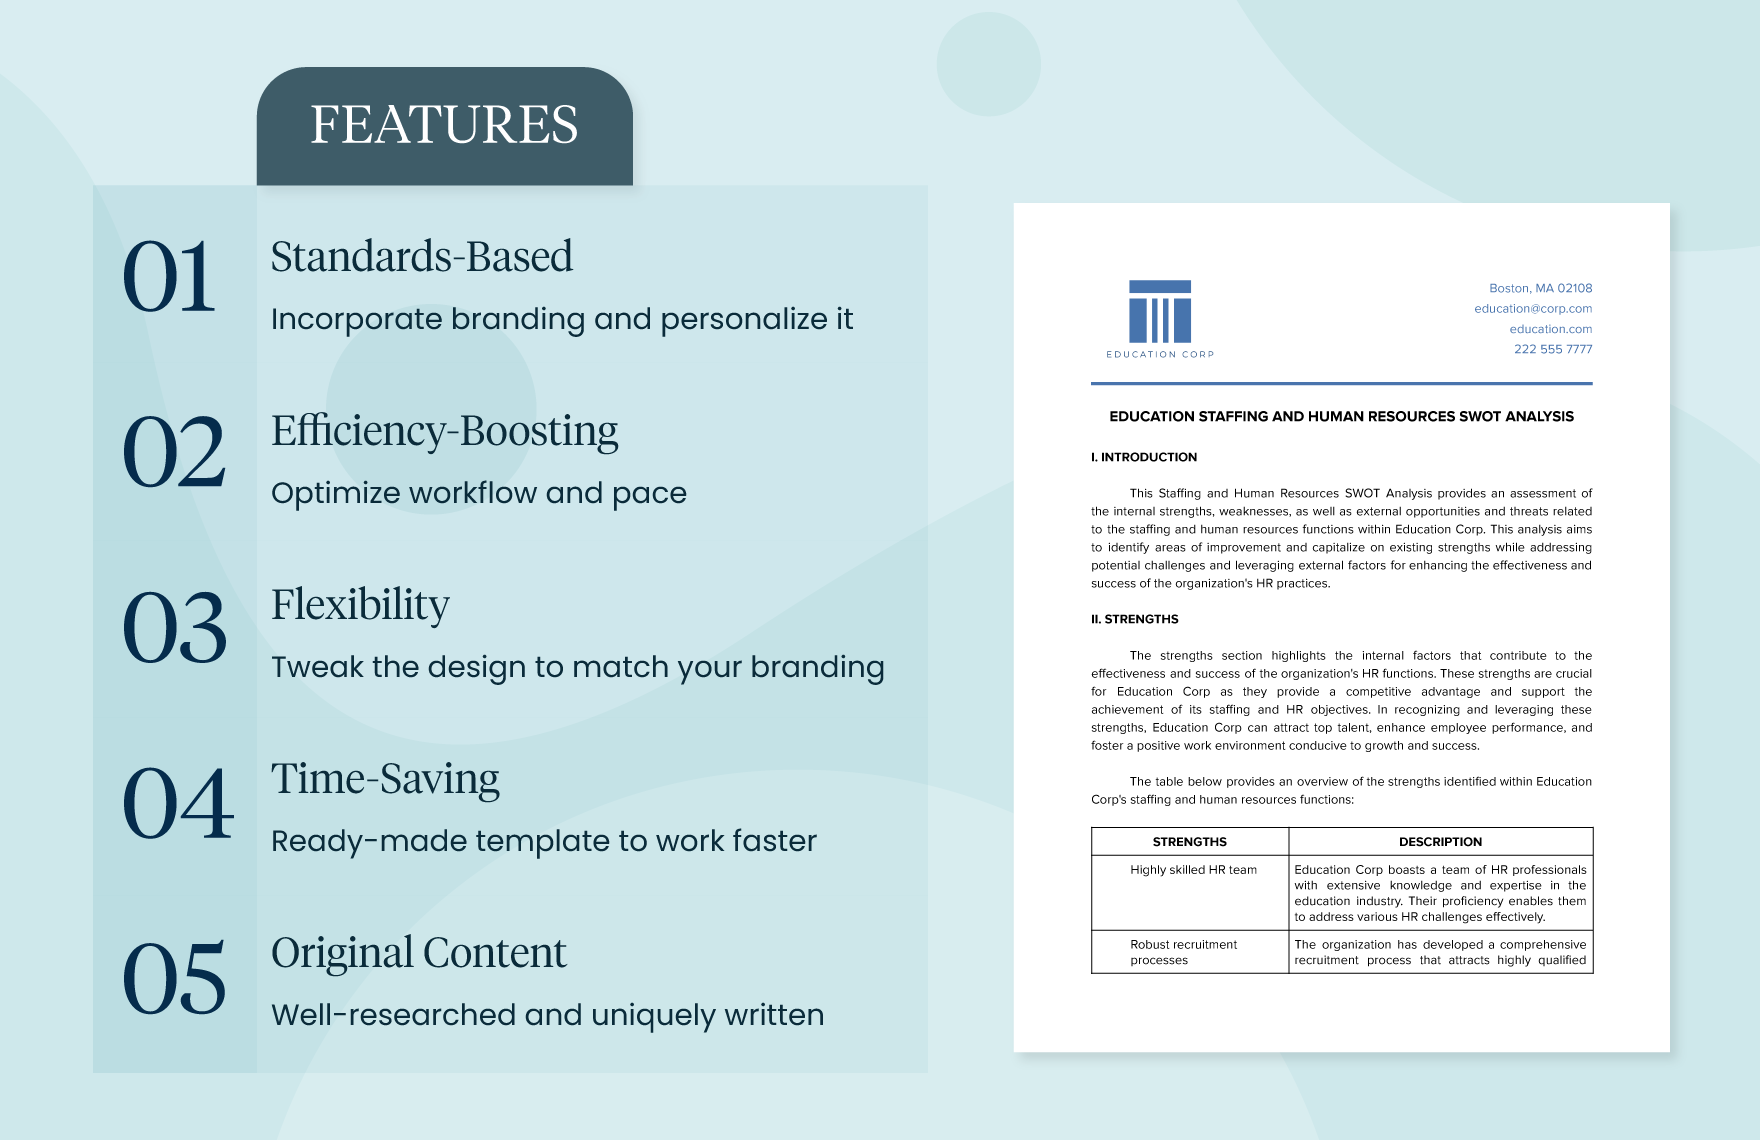 Education Staffing and Human Resources SWOT Analysis Template